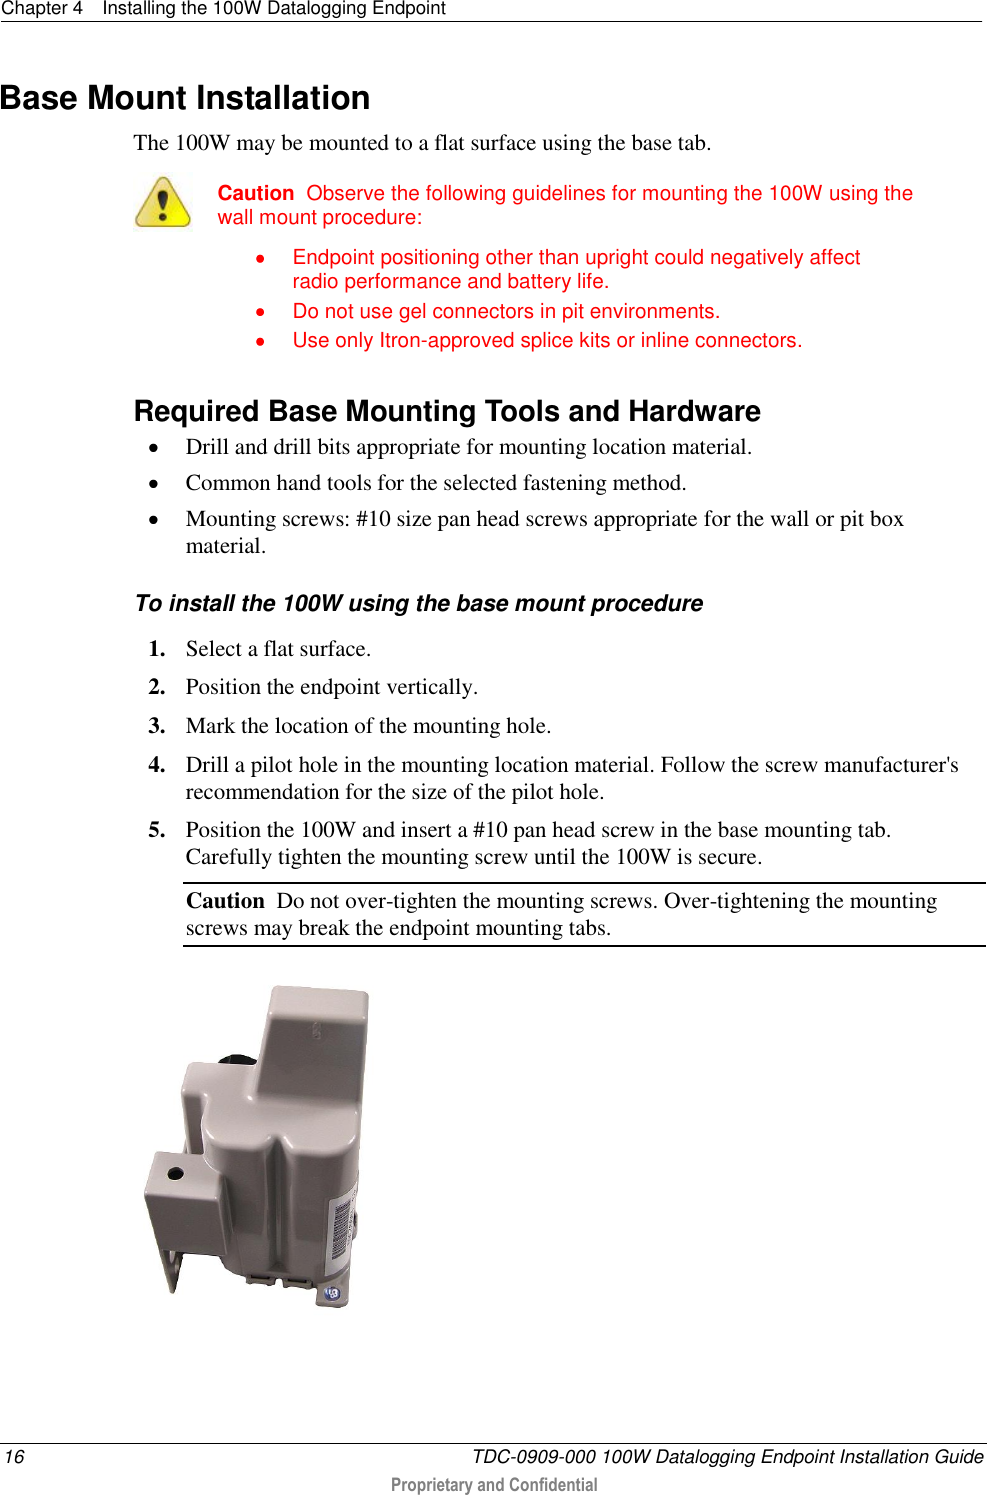 Chapter 4  Installing the 100W Datalogging Endpoint  16  TDC-0909-000 100W Datalogging Endpoint Installation Guide  Proprietary and Confidential  Base Mount Installation The 100W may be mounted to a flat surface using the base tab.   Caution  Observe the following guidelines for mounting the 100W using the wall mount procedure:   Endpoint positioning other than upright could negatively affect radio performance and battery life.   Do not use gel connectors in pit environments.   Use only Itron-approved splice kits or inline connectors.   Required Base Mounting Tools and Hardware  Drill and drill bits appropriate for mounting location material.  Common hand tools for the selected fastening method.  Mounting screws: #10 size pan head screws appropriate for the wall or pit box material.  To install the 100W using the base mount procedure 1. Select a flat surface. 2. Position the endpoint vertically. 3. Mark the location of the mounting hole. 4. Drill a pilot hole in the mounting location material. Follow the screw manufacturer&apos;s recommendation for the size of the pilot hole. 5. Position the 100W and insert a #10 pan head screw in the base mounting tab. Carefully tighten the mounting screw until the 100W is secure. Caution  Do not over-tighten the mounting screws. Over-tightening the mounting screws may break the endpoint mounting tabs.   